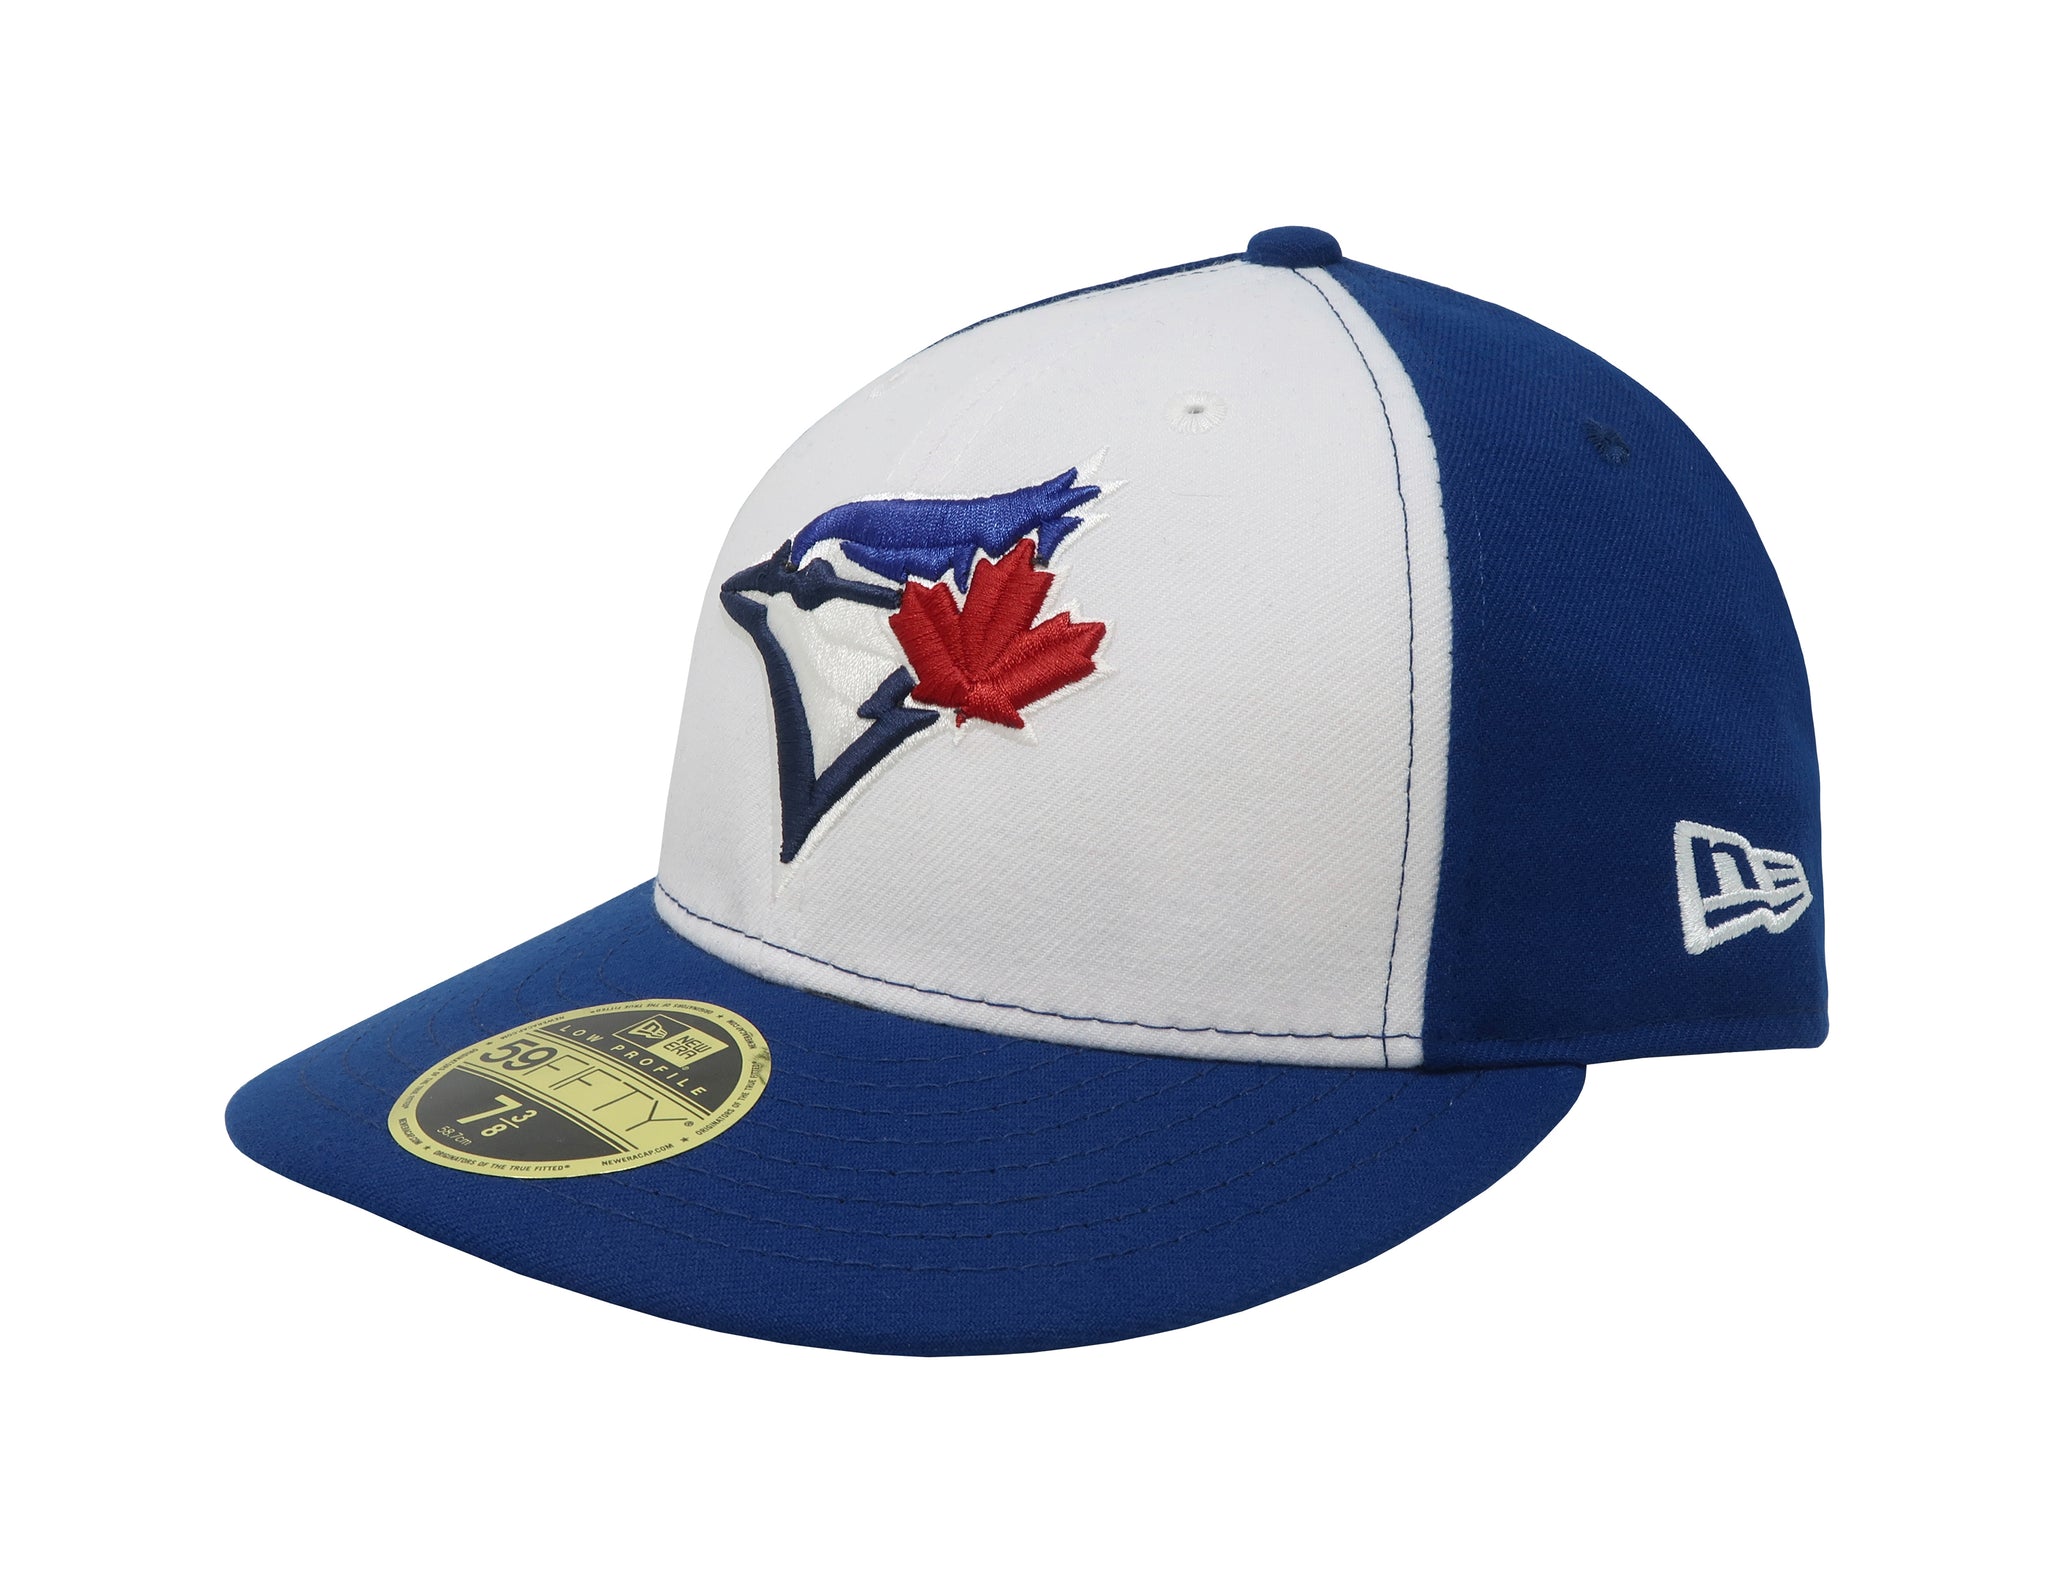 Men's New Era Toronto Blue Jays Black & White Low Profile 59FIFTY Fitted Hat